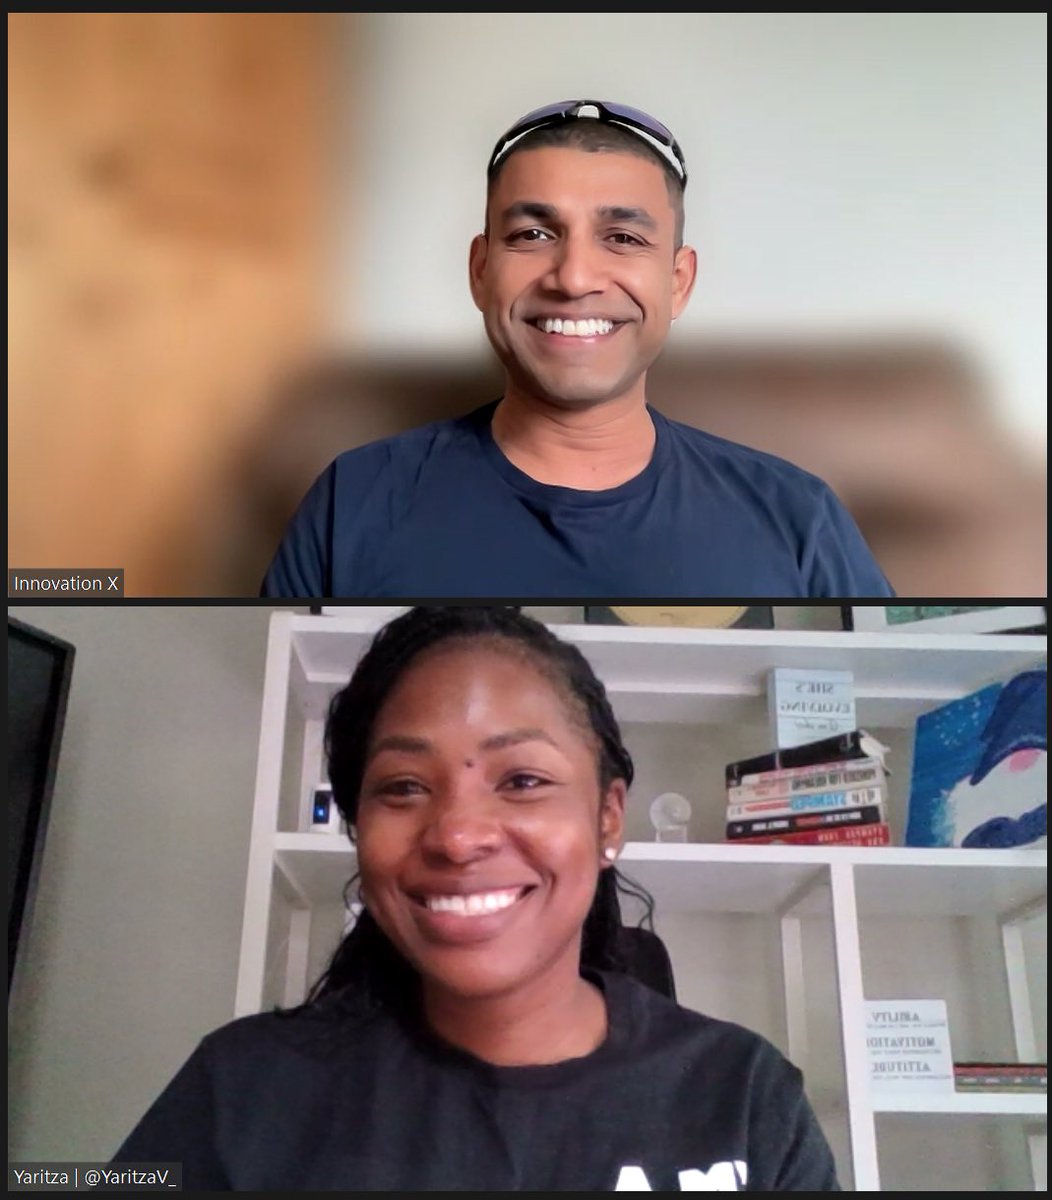 Amazing meeting this morning with the one and only @EvoHannan. WE ARE TAKING OVER THE WORLD‼️ #GlobalCollaboration #Innovation #EdTech #SDGs #CurriculumDesign #Consulting #Fusion #Diversity